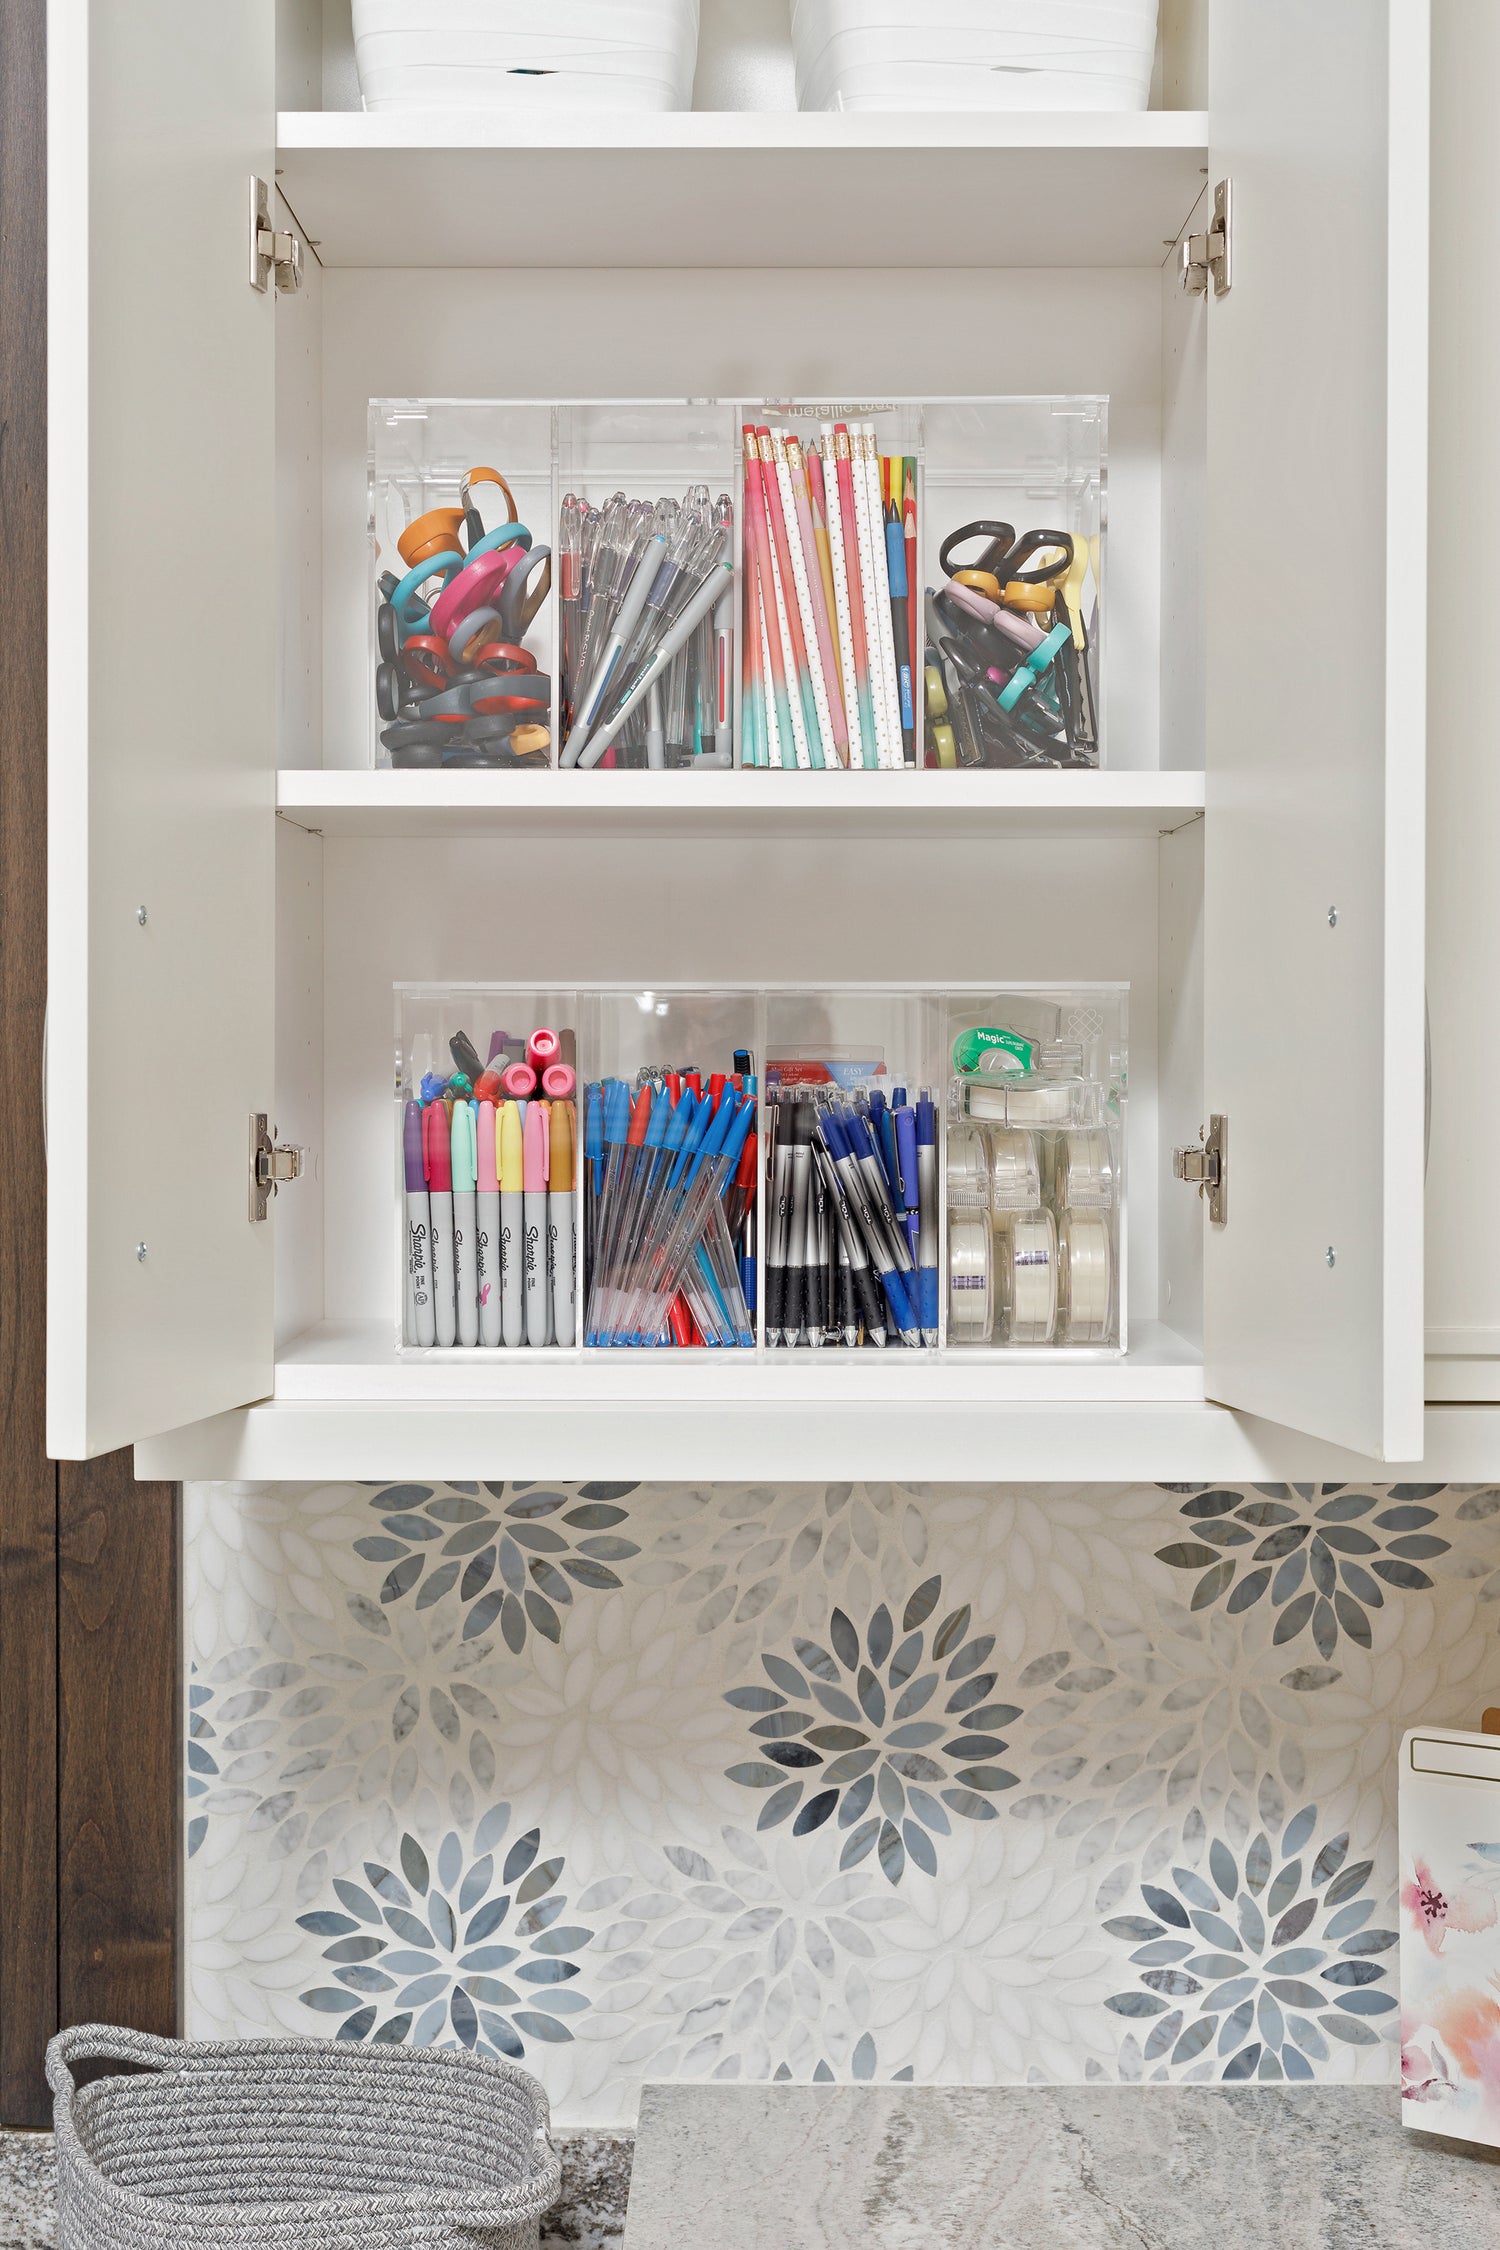 A cabinet filled with crafting supplies contained in clear acrylic organizers.